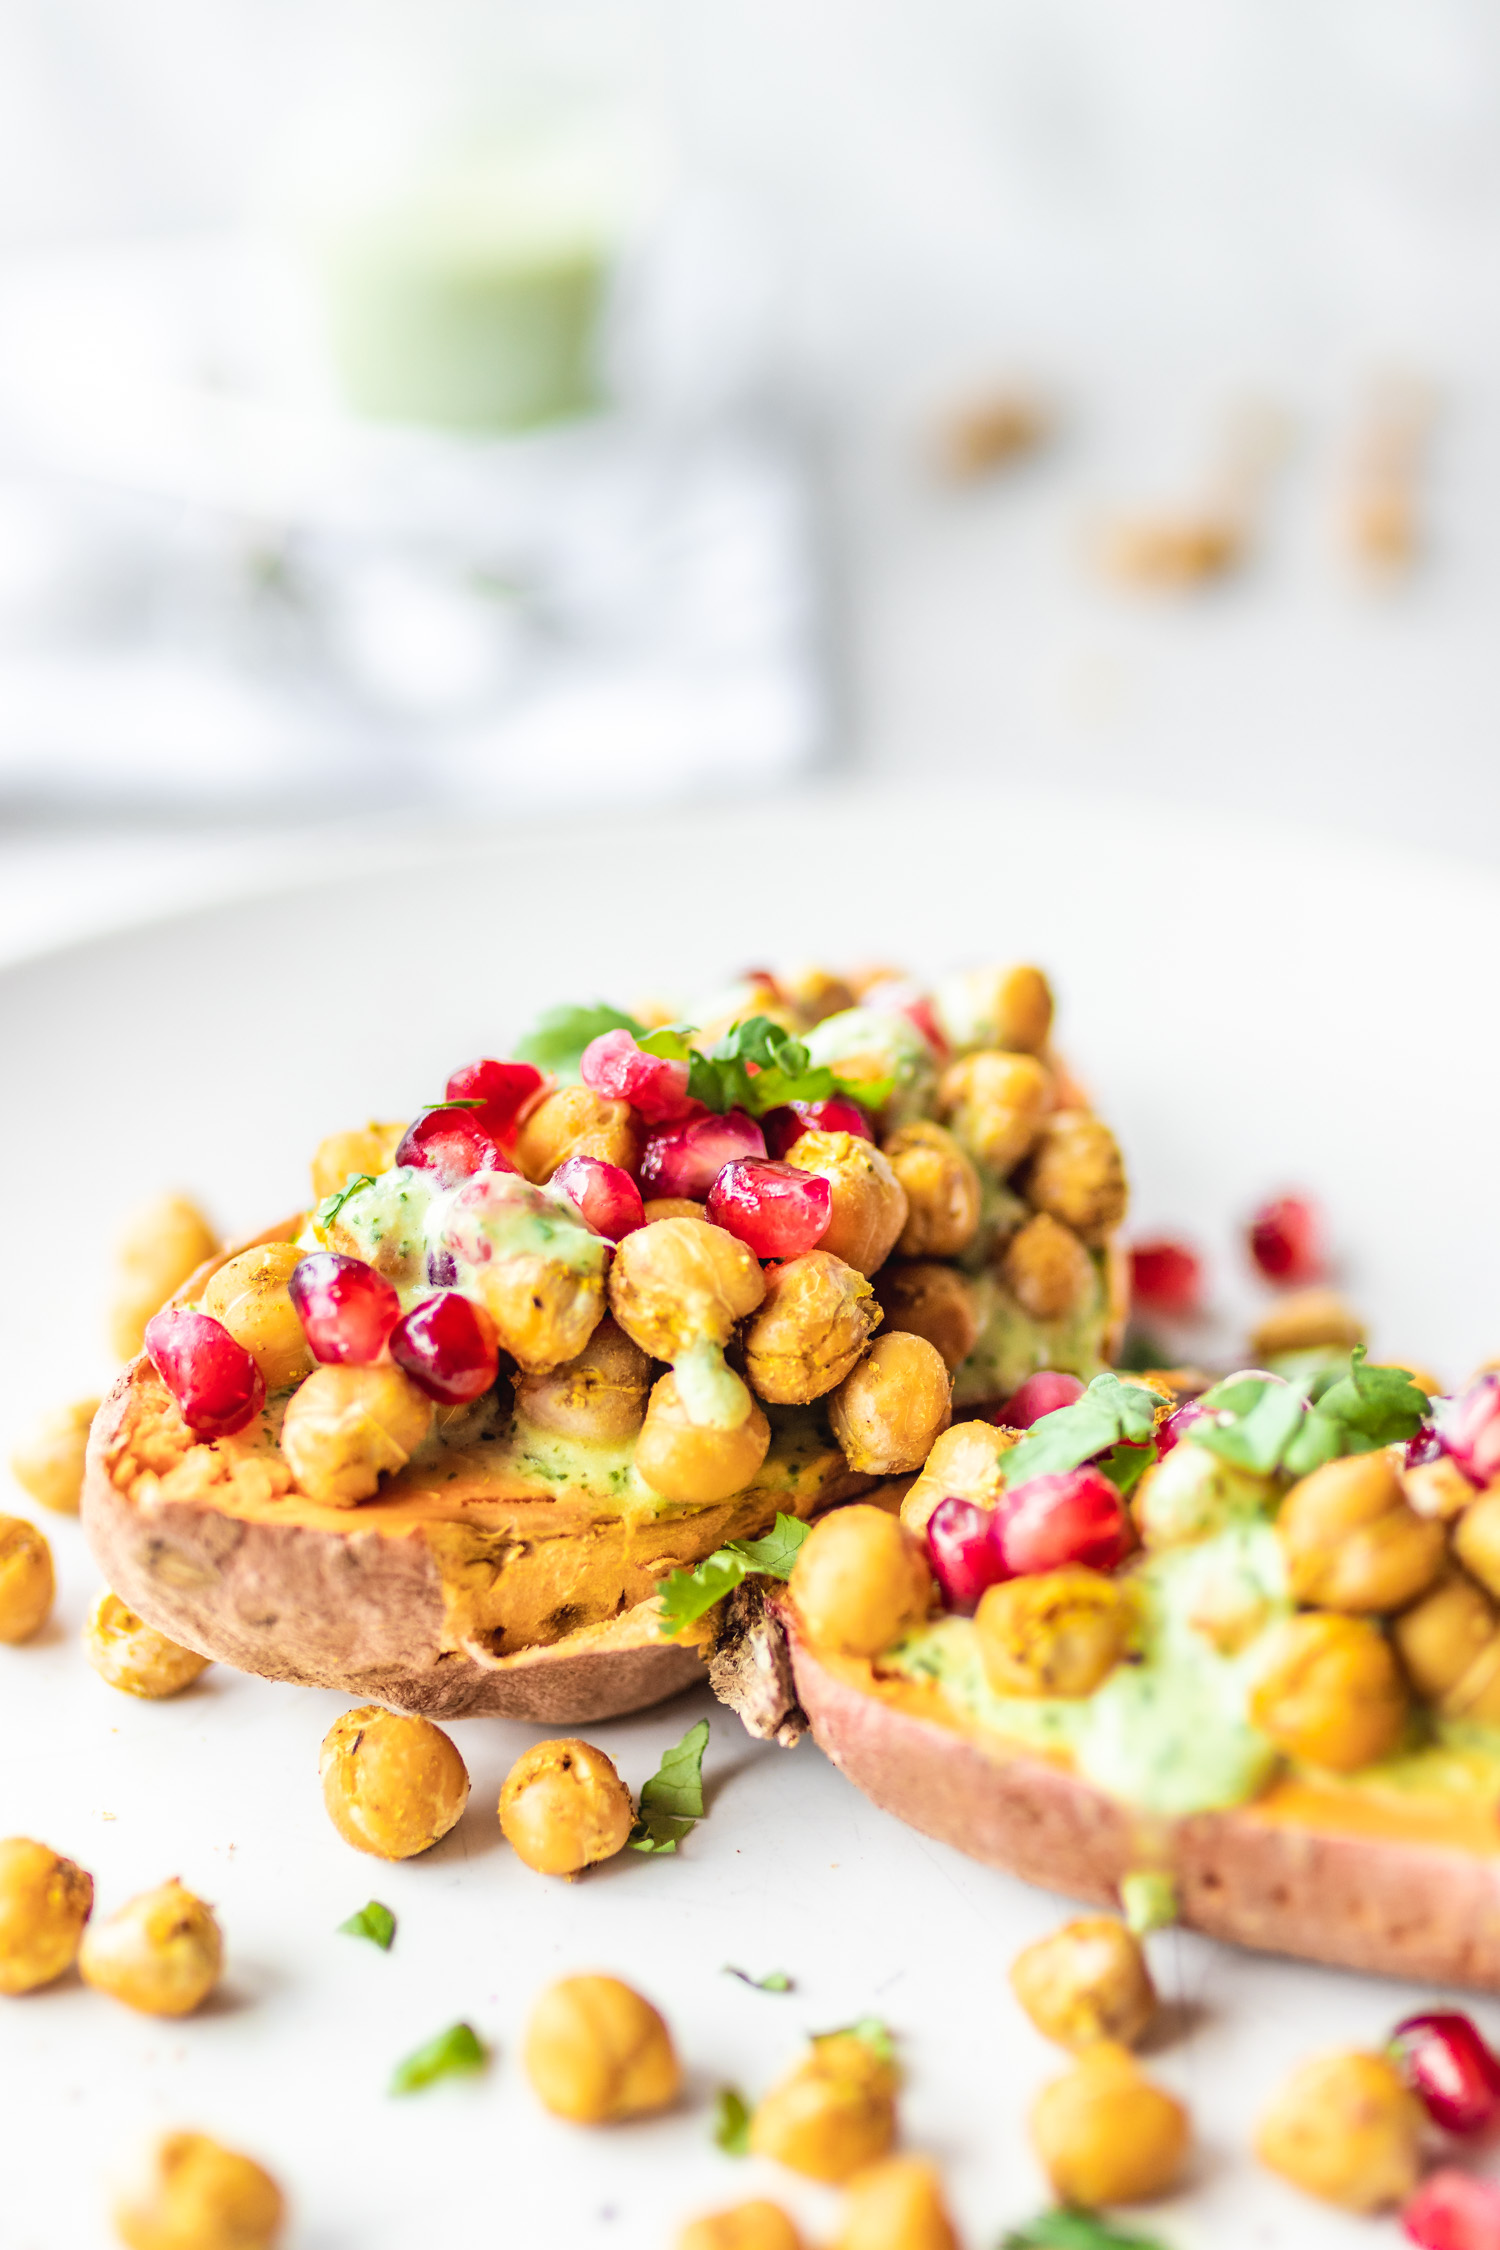 Loaded Sweet Potatoes with Baked Chickpeas and Herb Drizzle and pomegranate on a plate